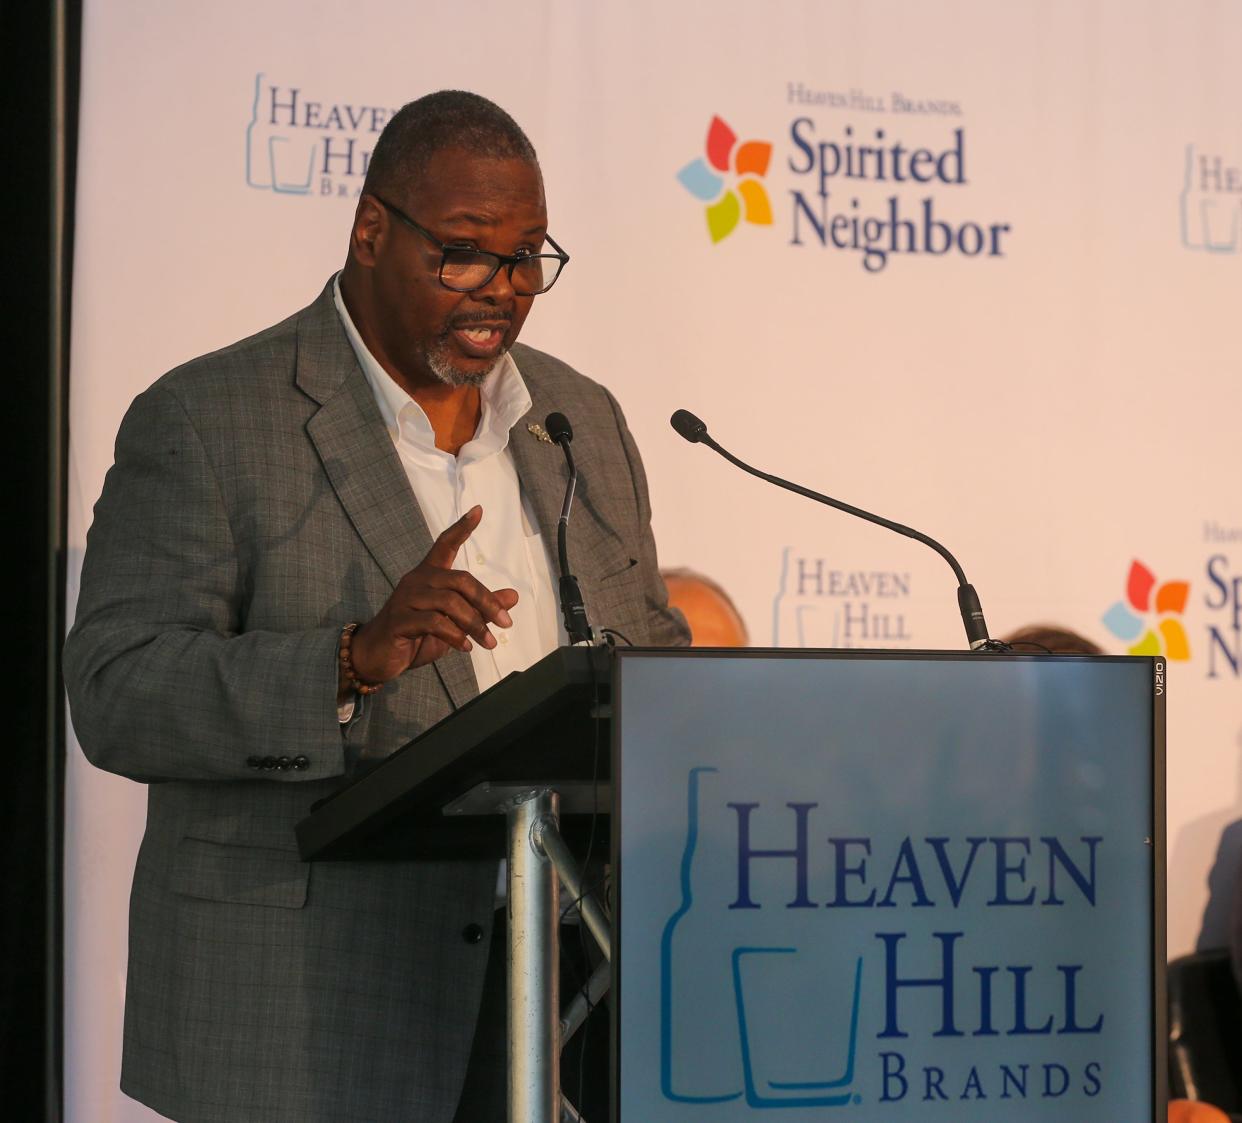 Dave Christopher á Founder at Adventurous Minds Produce Extraordinary Dreams (AMPED) speaks during a press conference to announce an $800,000 gift from Heaven Hill to different organizations in the California neighborhood on Friday, July 14, 2023